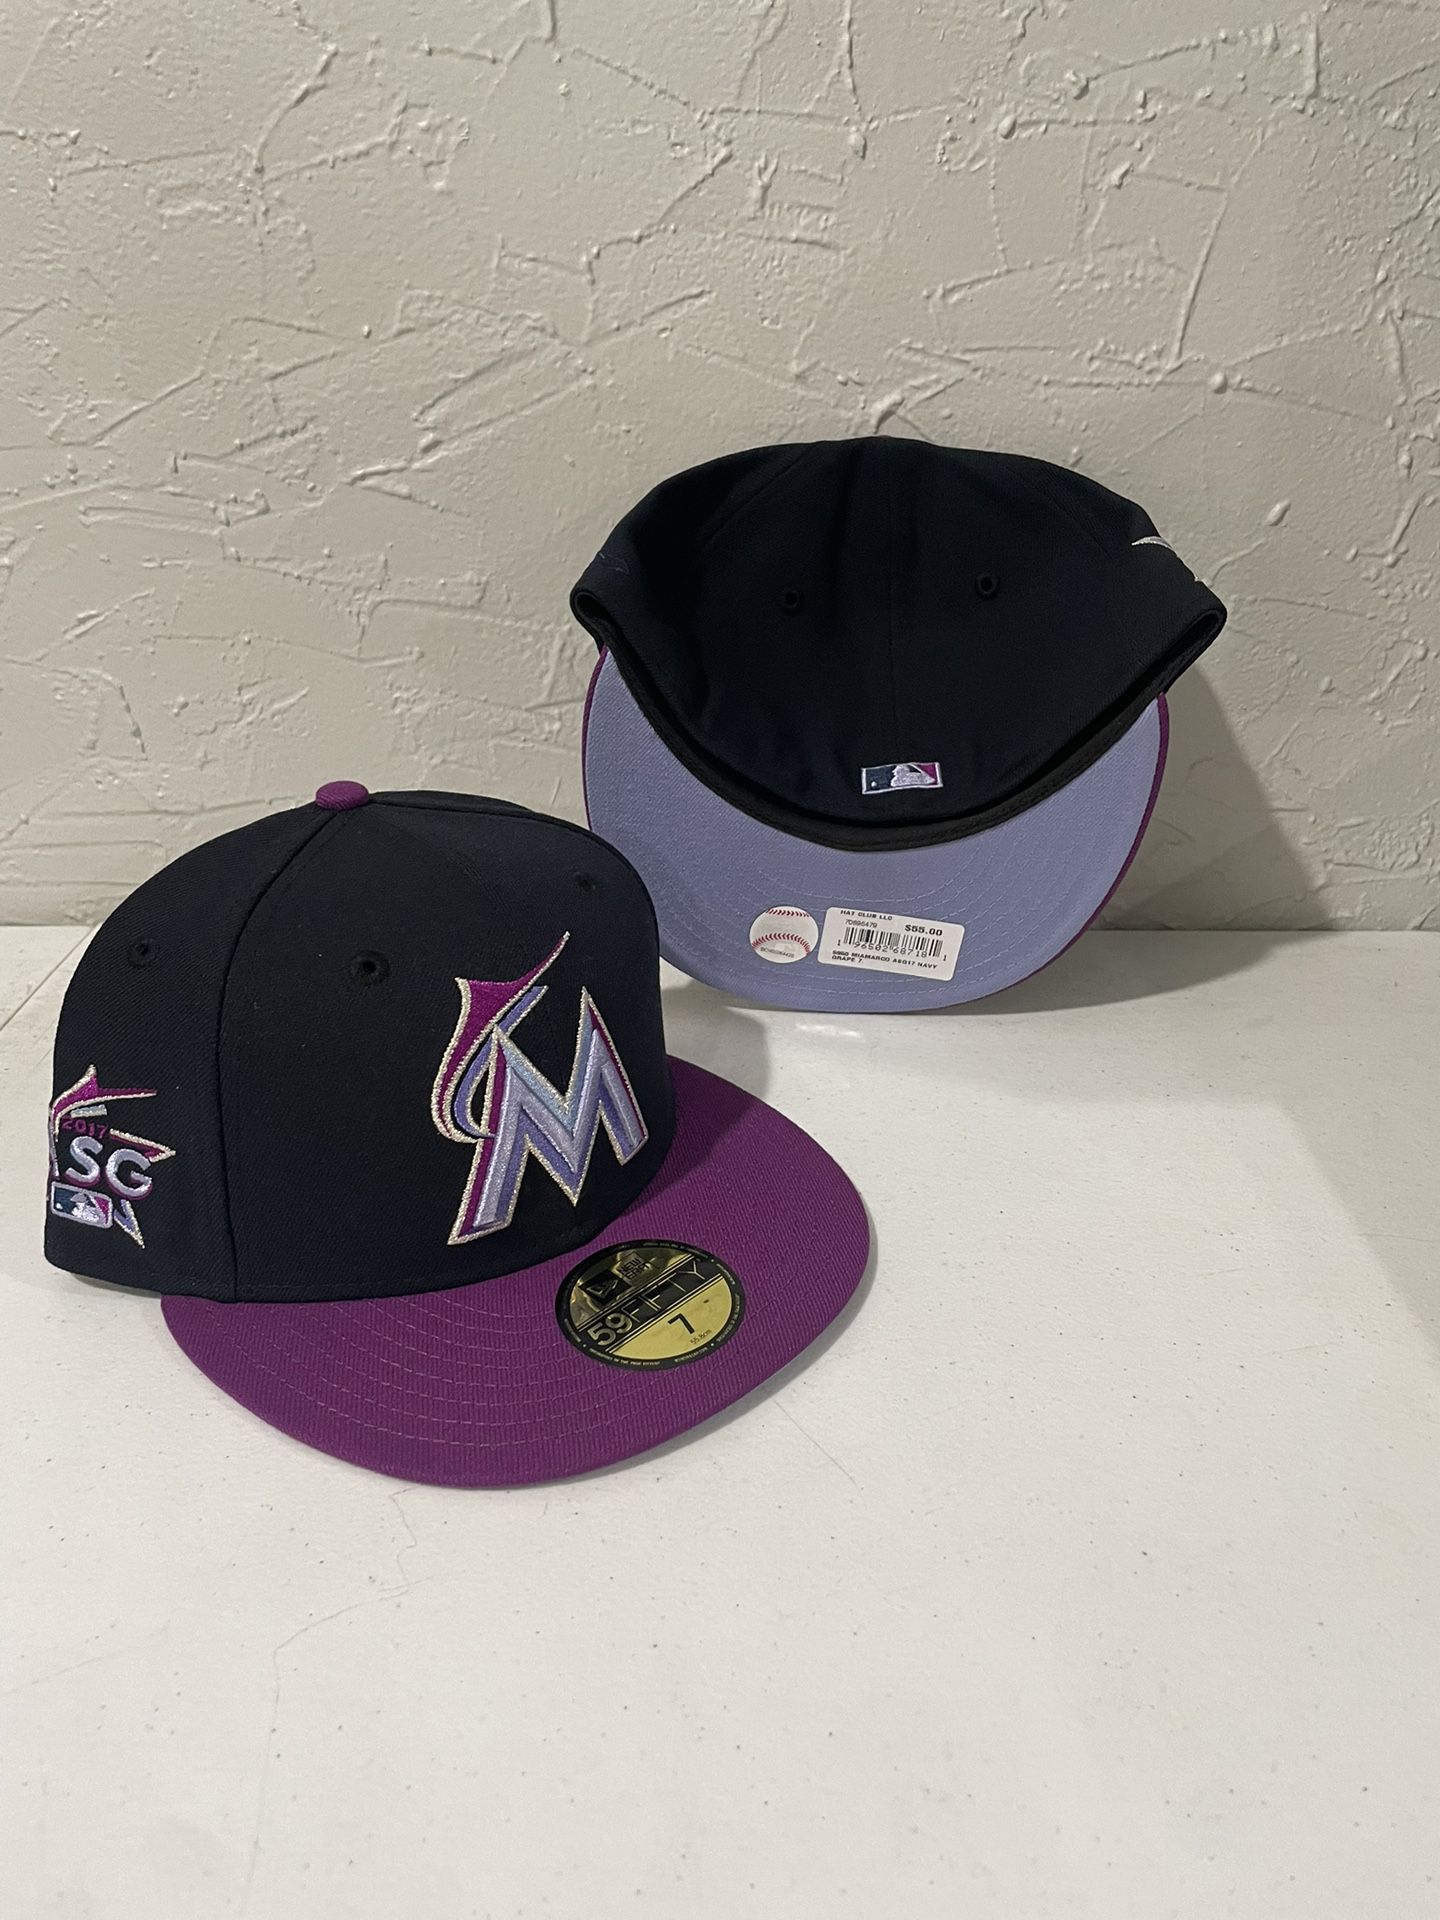 2017 mlb all star game hats